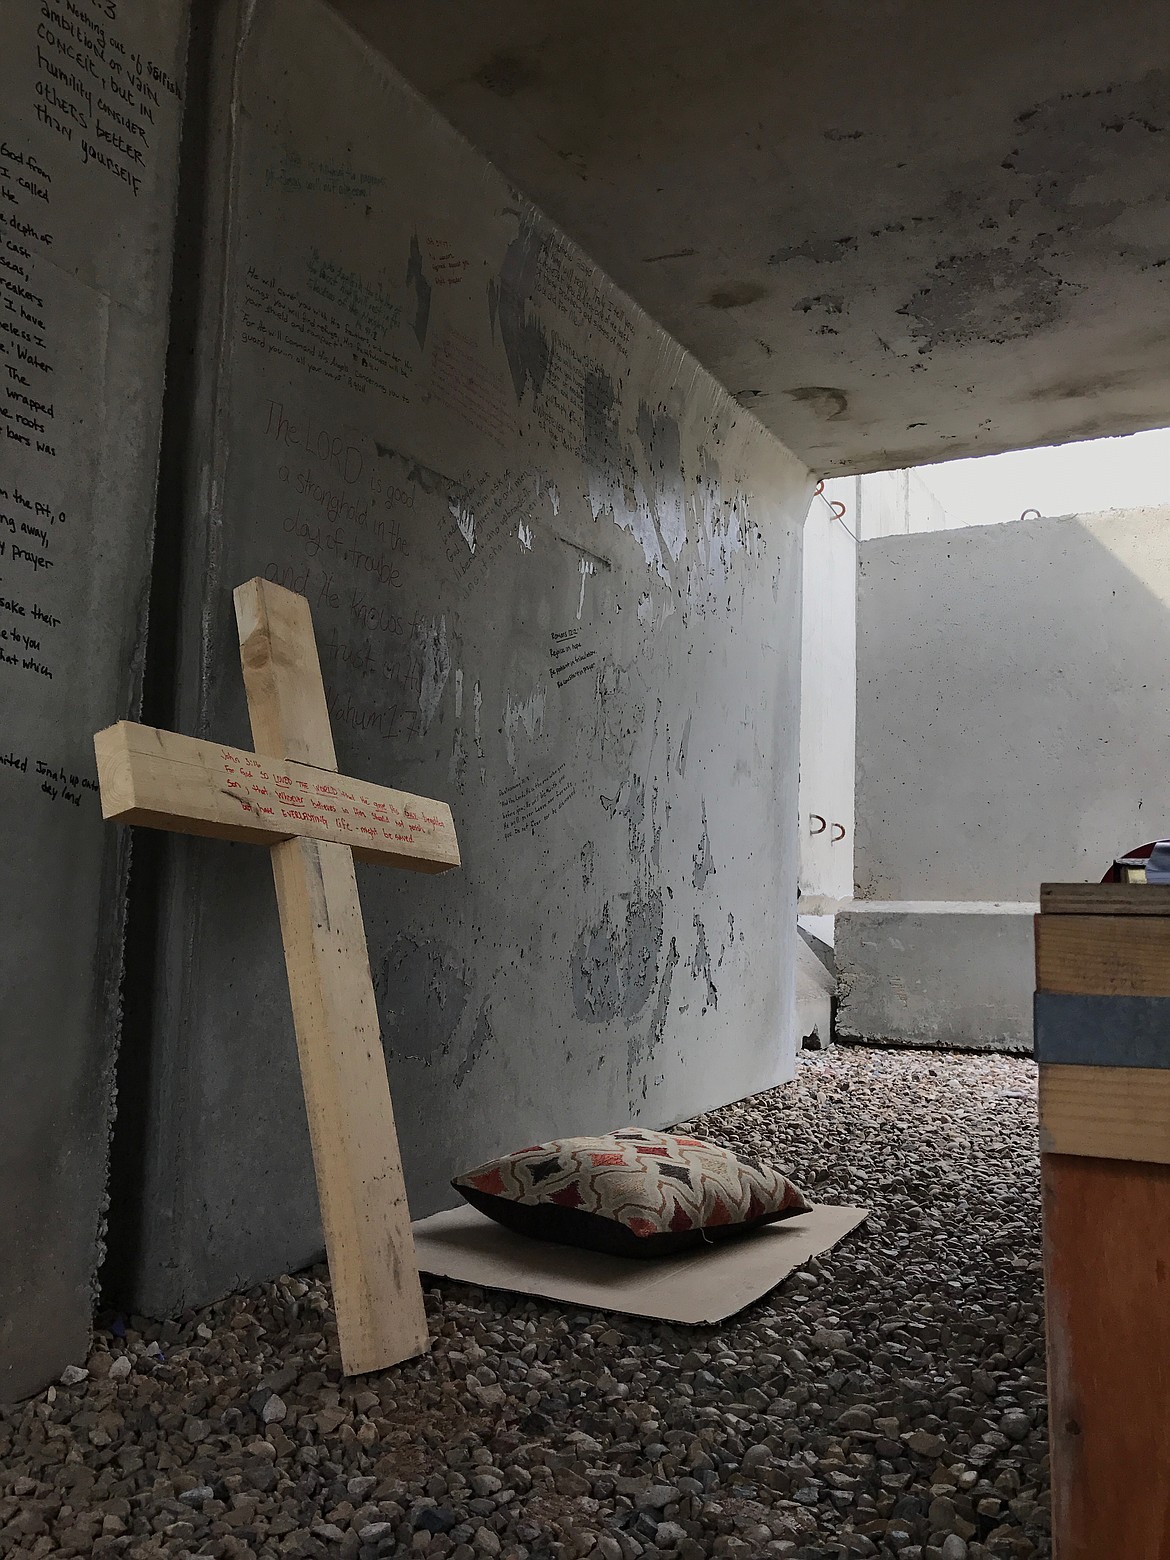 A prayer bunker in Mosul, one of the only places to be alone in the city&#146;s medical area.